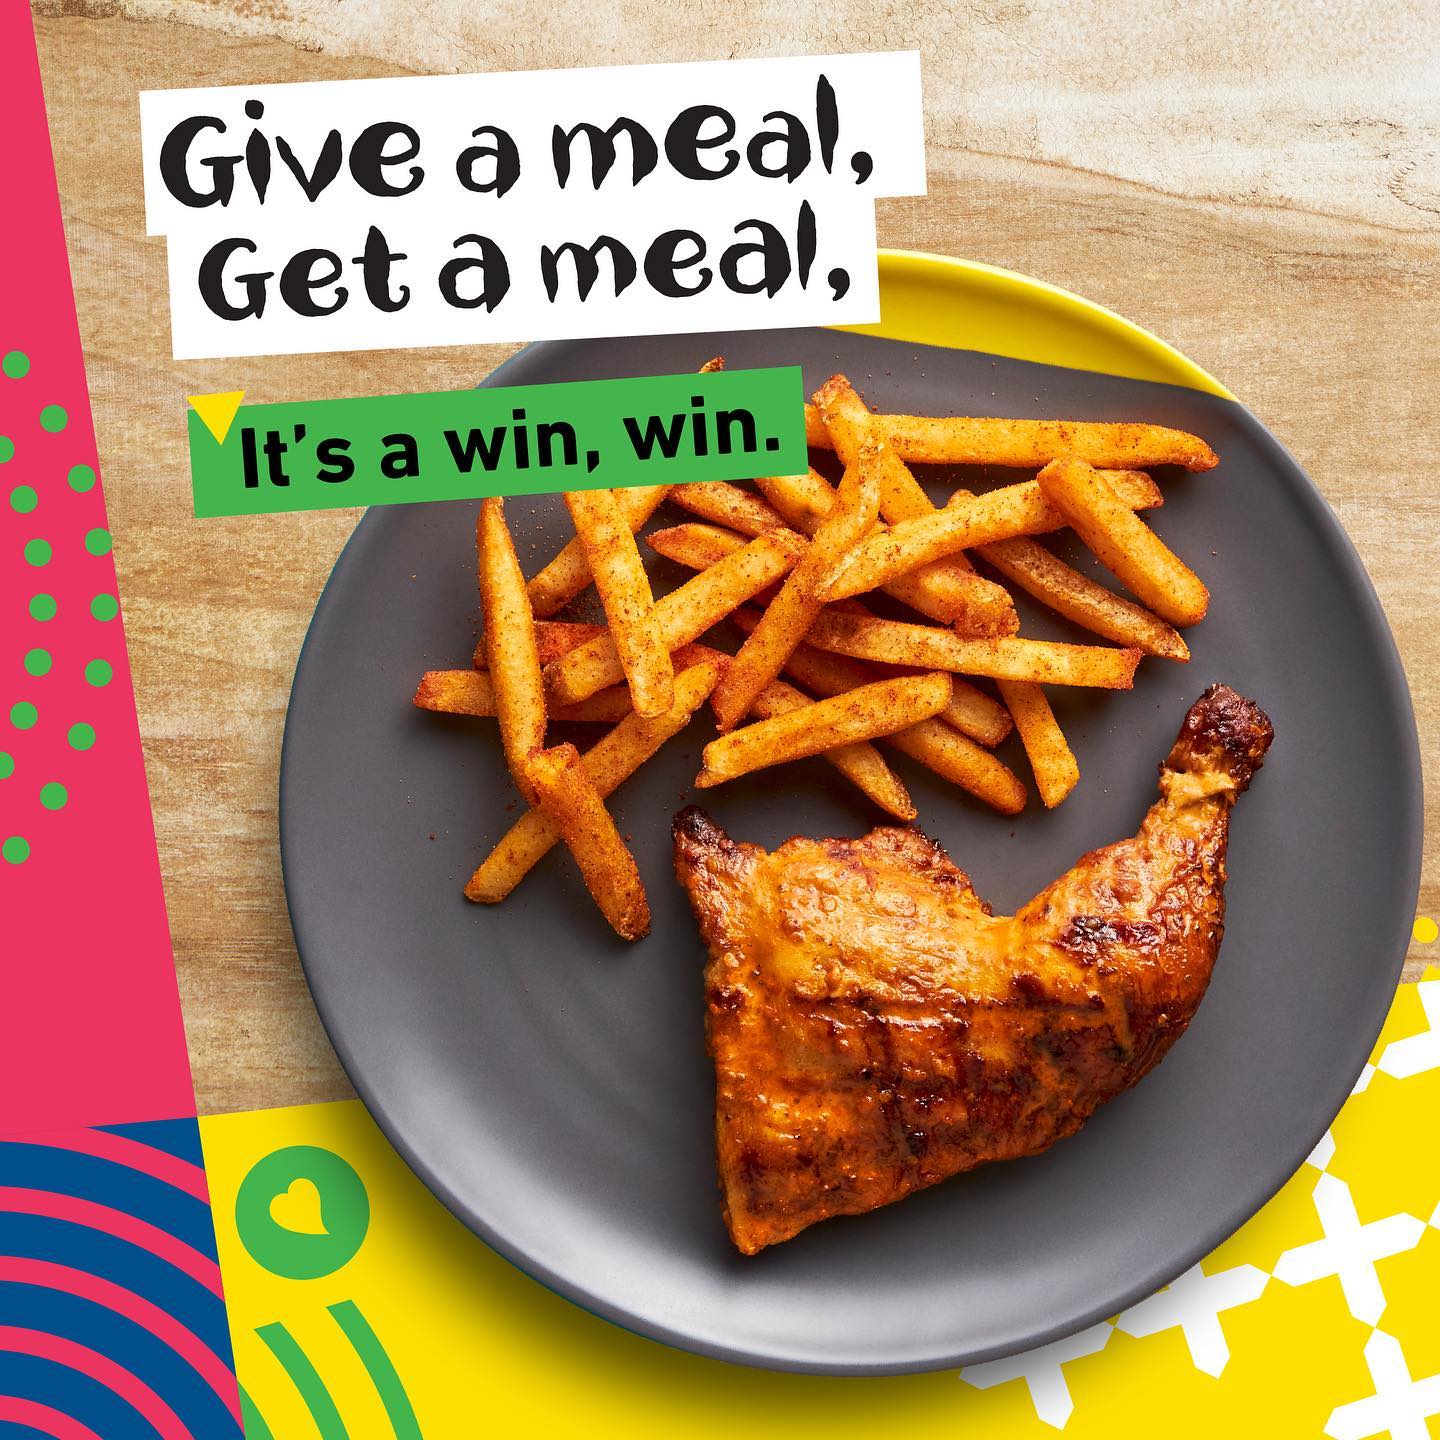 Free Chicken and PERi Fries from Nando’s